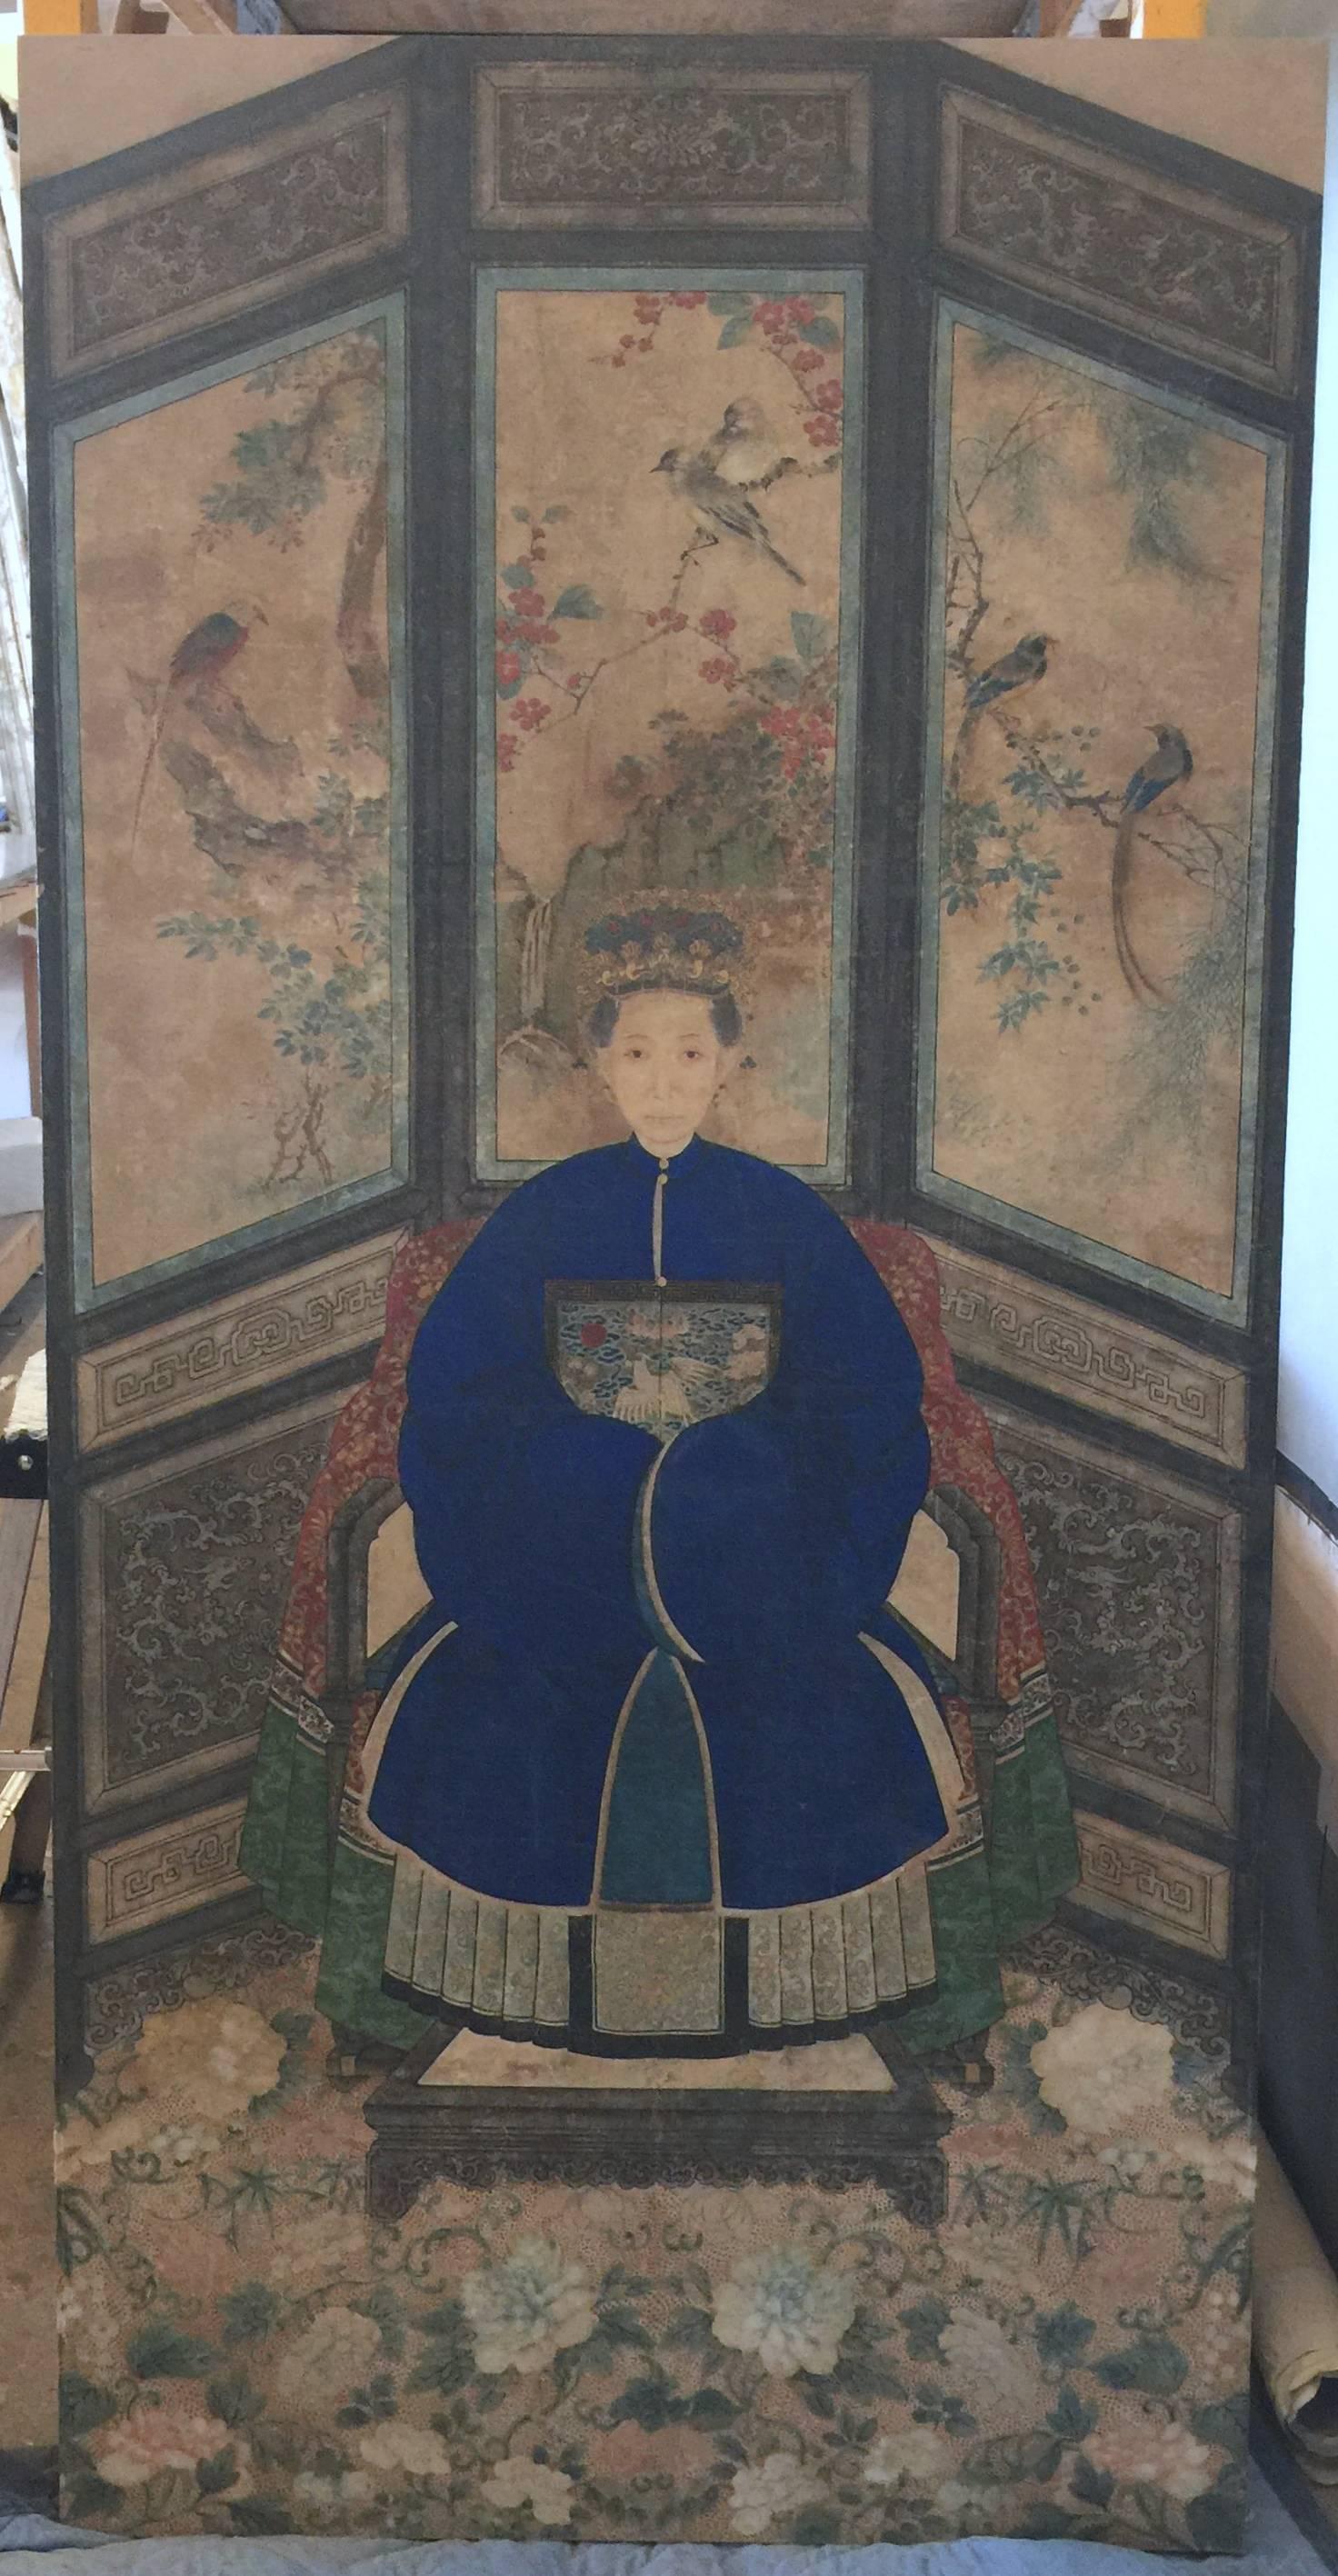 A beautifully painted and unusually detailed antique ancestor portrait.

The composition and perspective is unique, with very detailed design in the foreground and background.

Framed with an antiqued gold leaf frame.